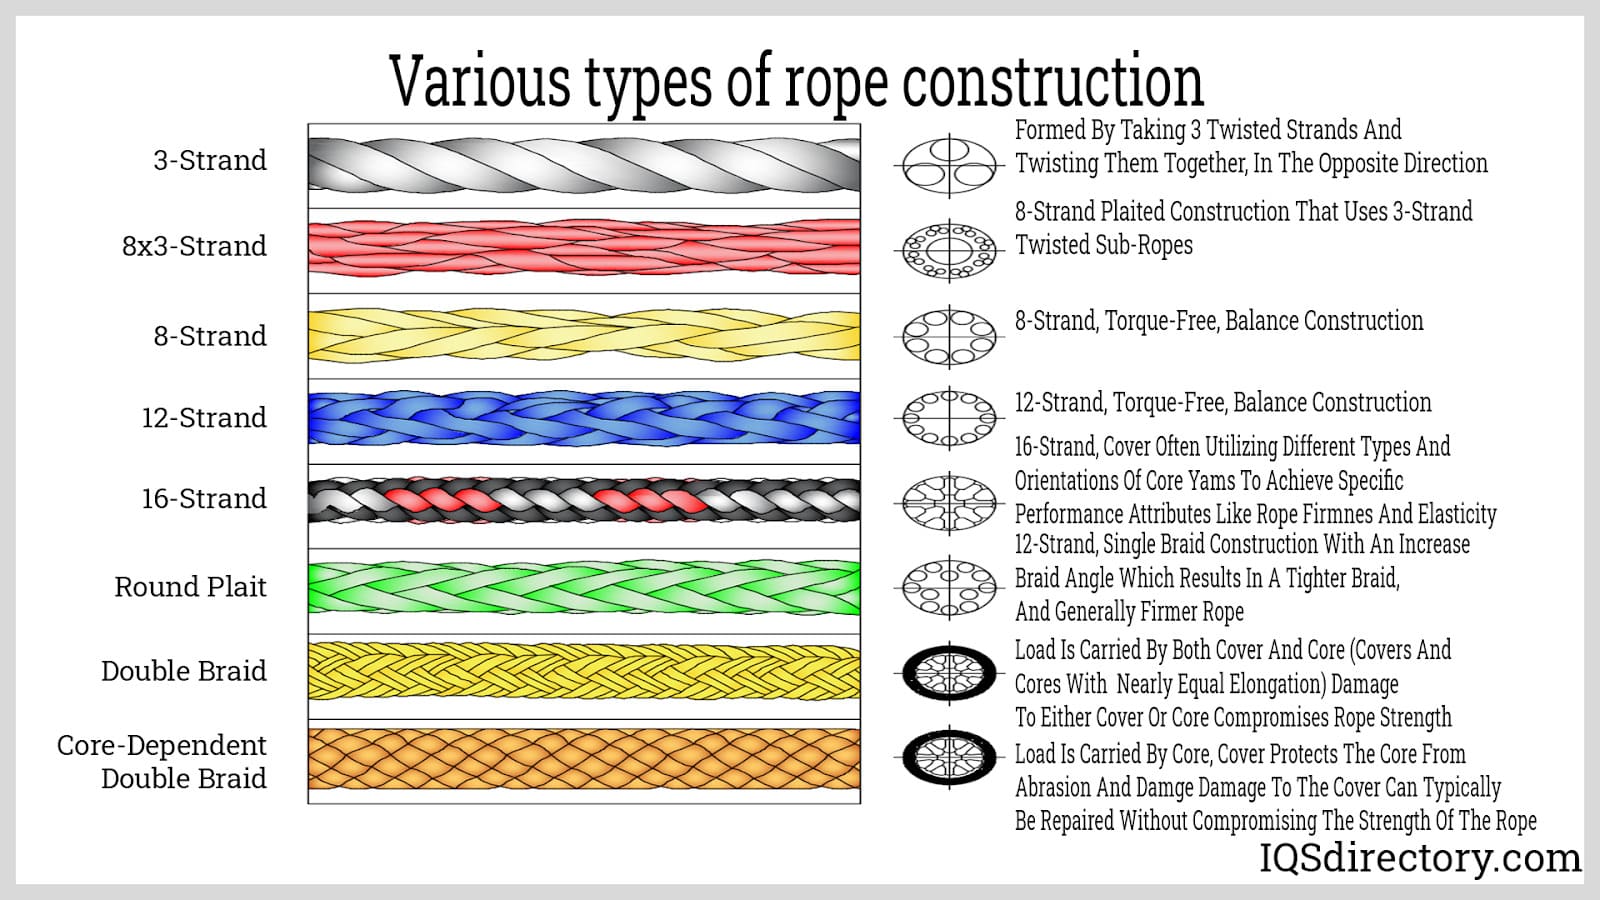 Cordage: What Is It? How Is It Made? Uses & Products